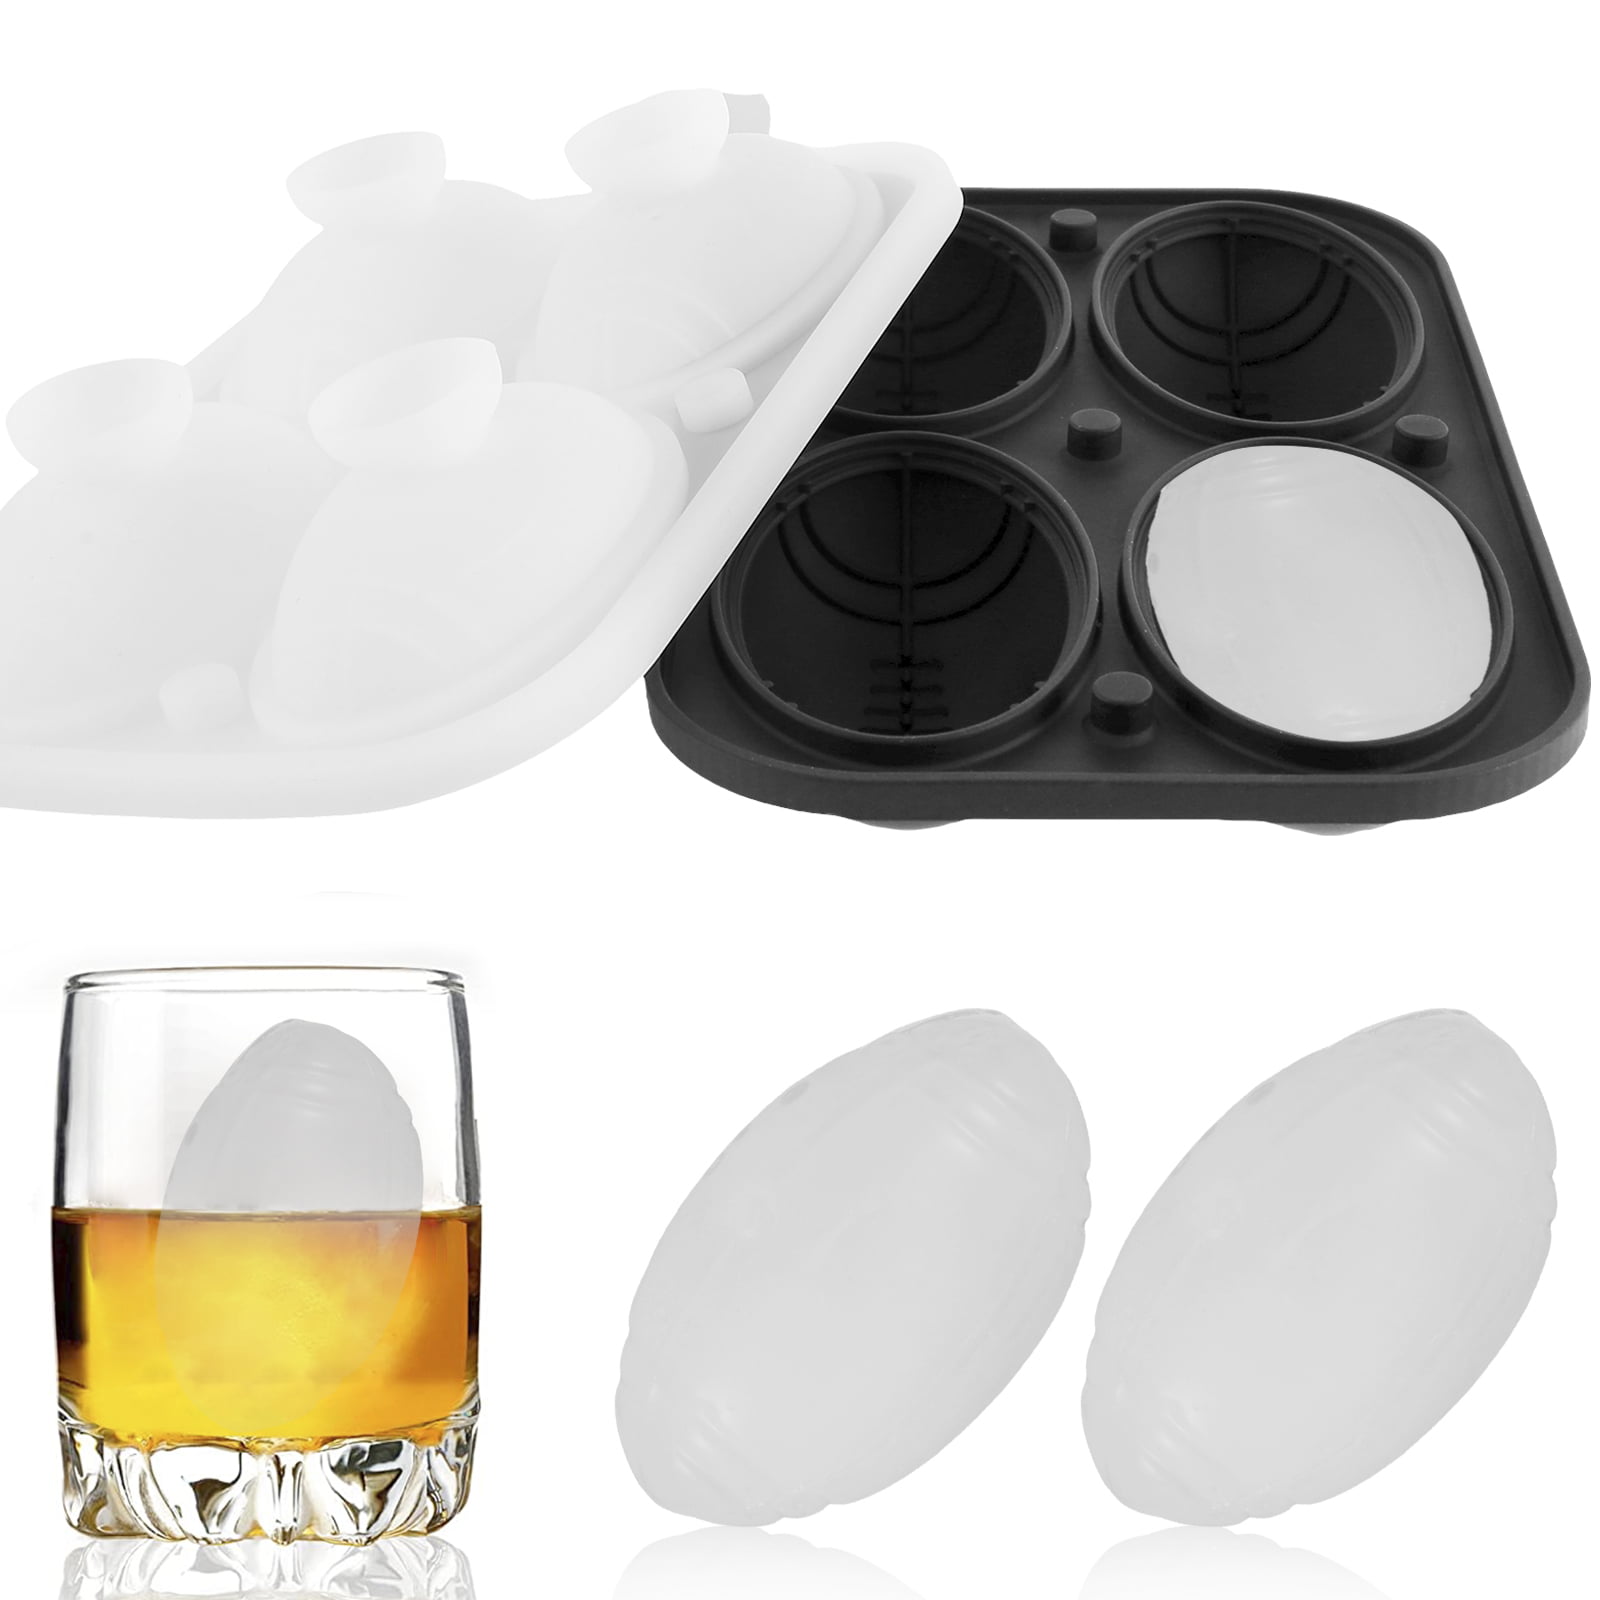 4-Large Ice Cube Ball Mold / Maker / Whiskey Round Mould / Ice Maker /  Silicone / Ice Ball Mould /Jelly Moulc / 冰球制冰模具 Packaging Plastic Bag HM  Bag / HM Singlet /